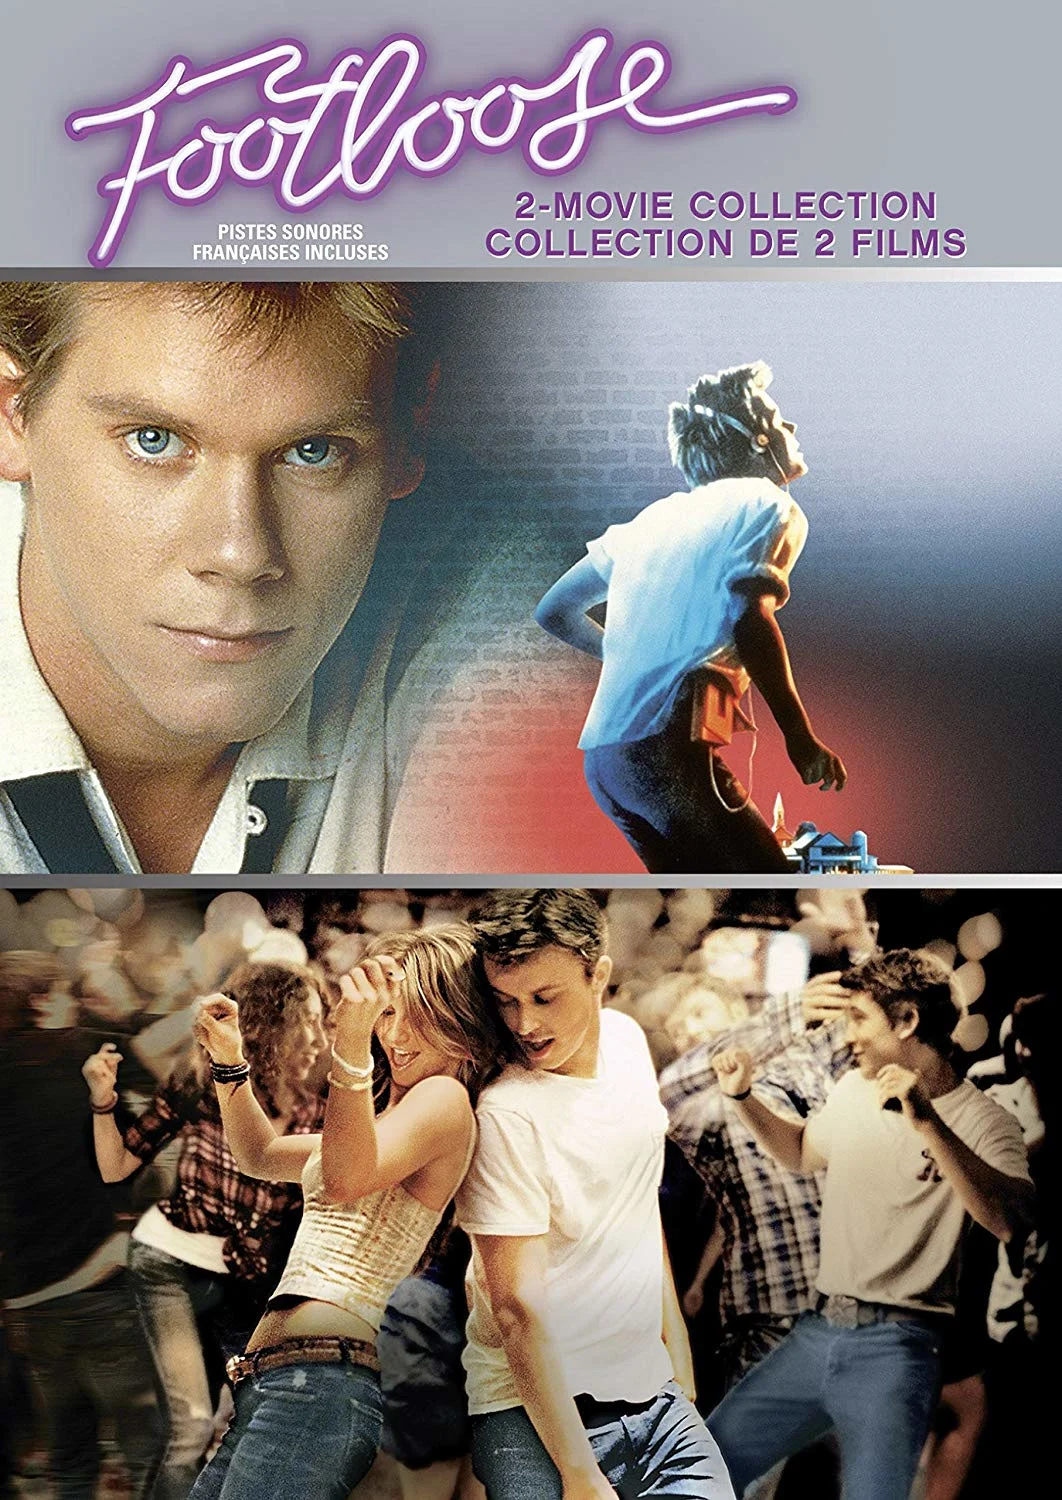 Footloose: 2 Movie Collection (DVD)